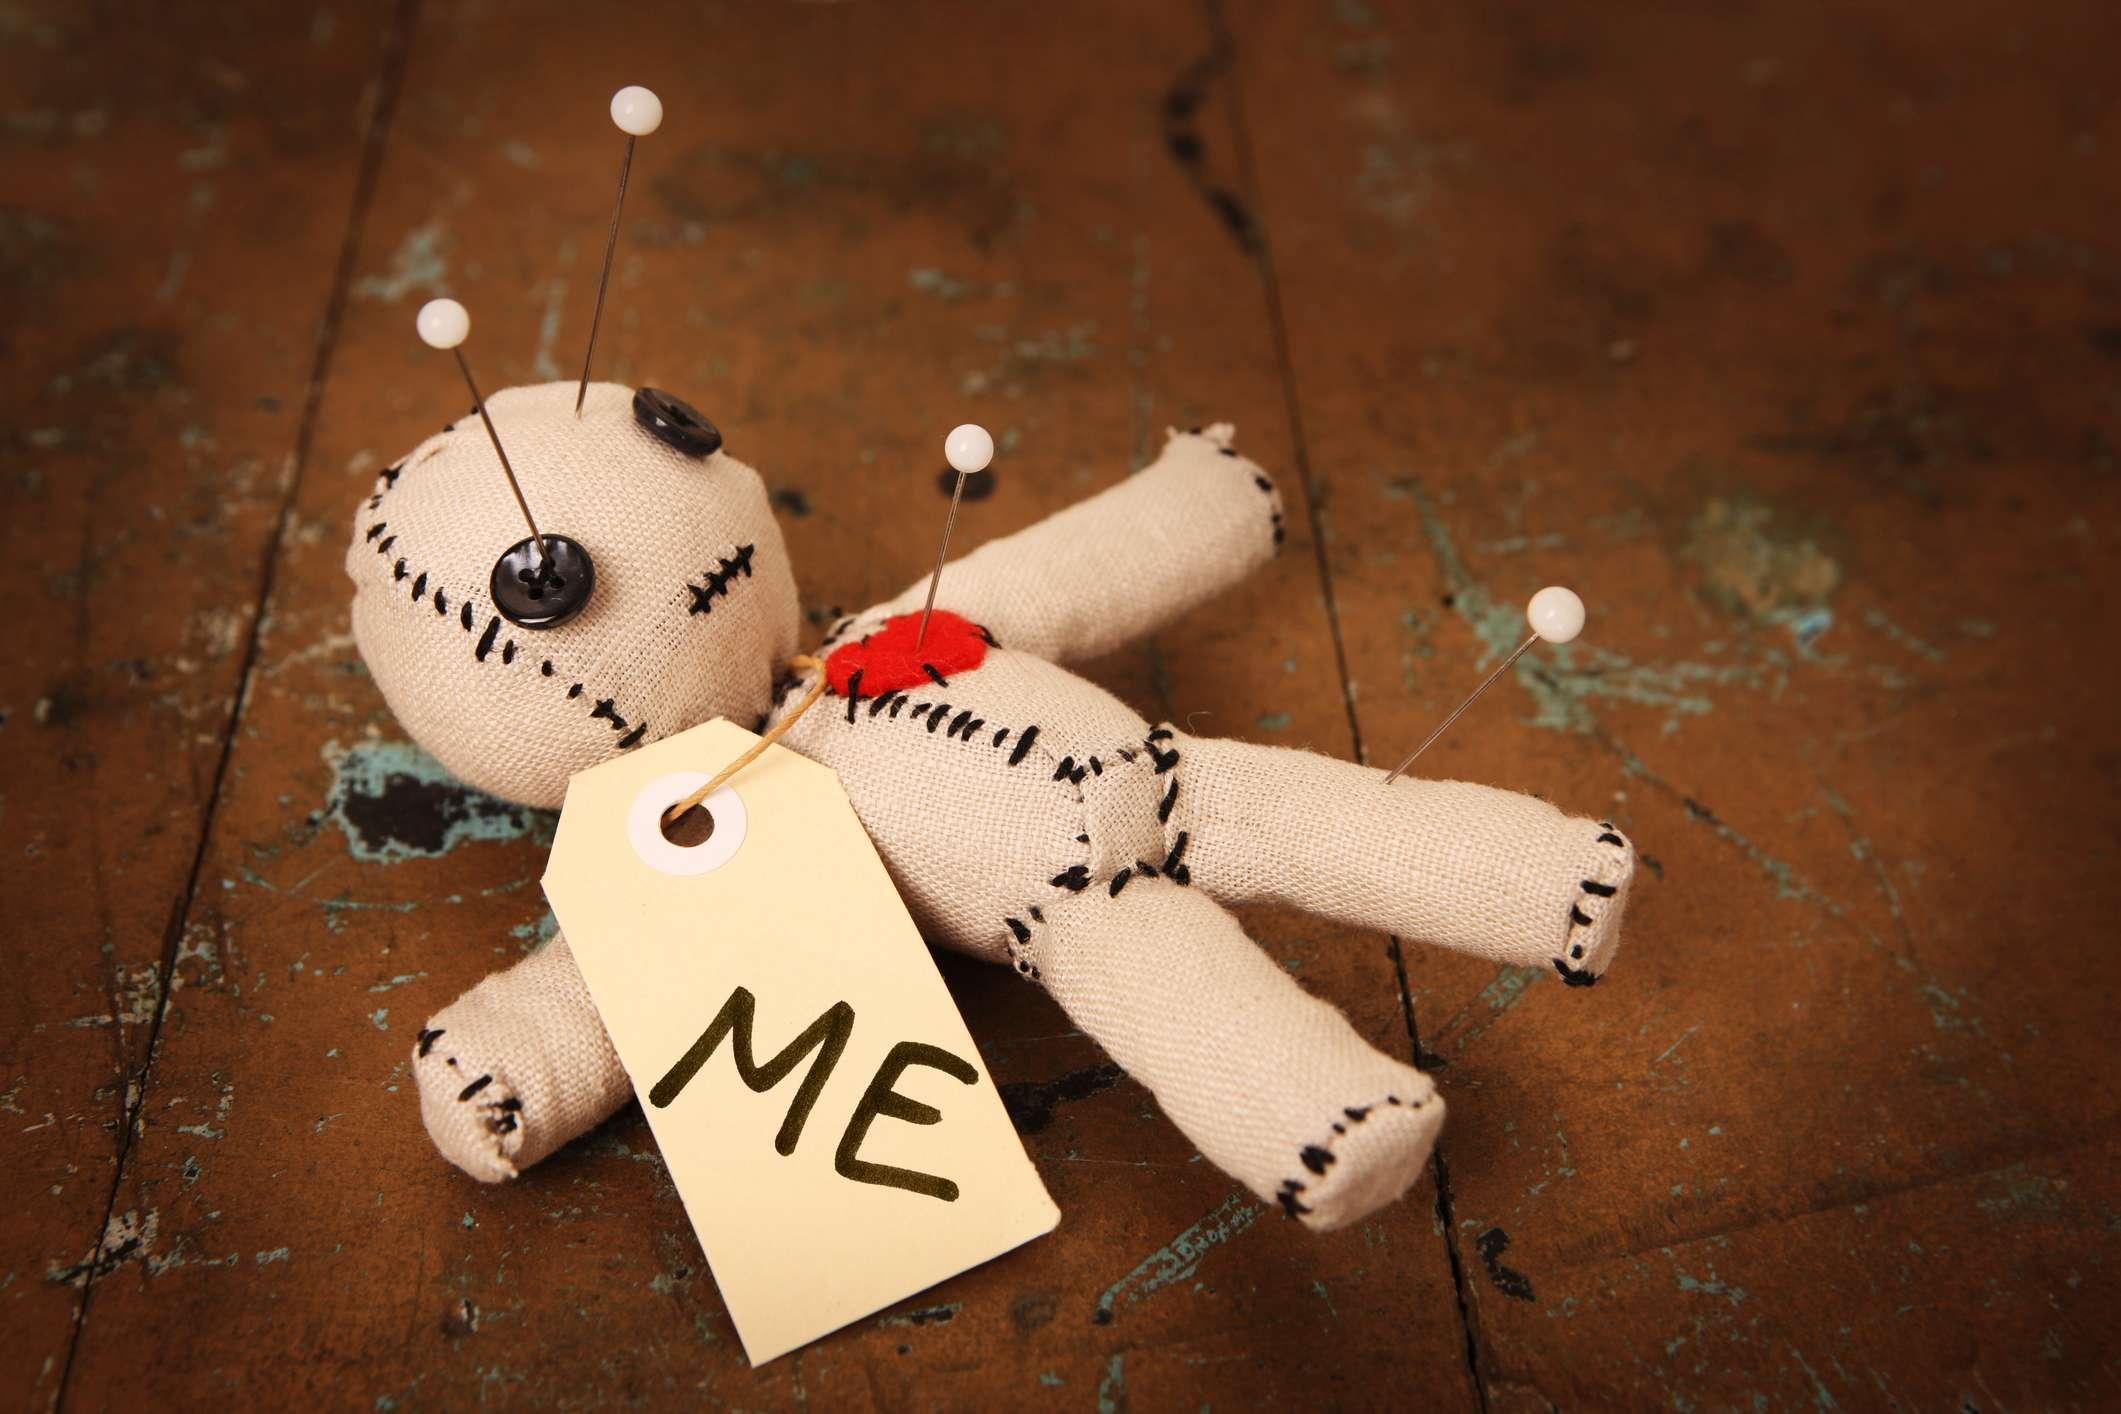 Cute handmade Voodoo Doll (made completely by me) with label marked "Me"